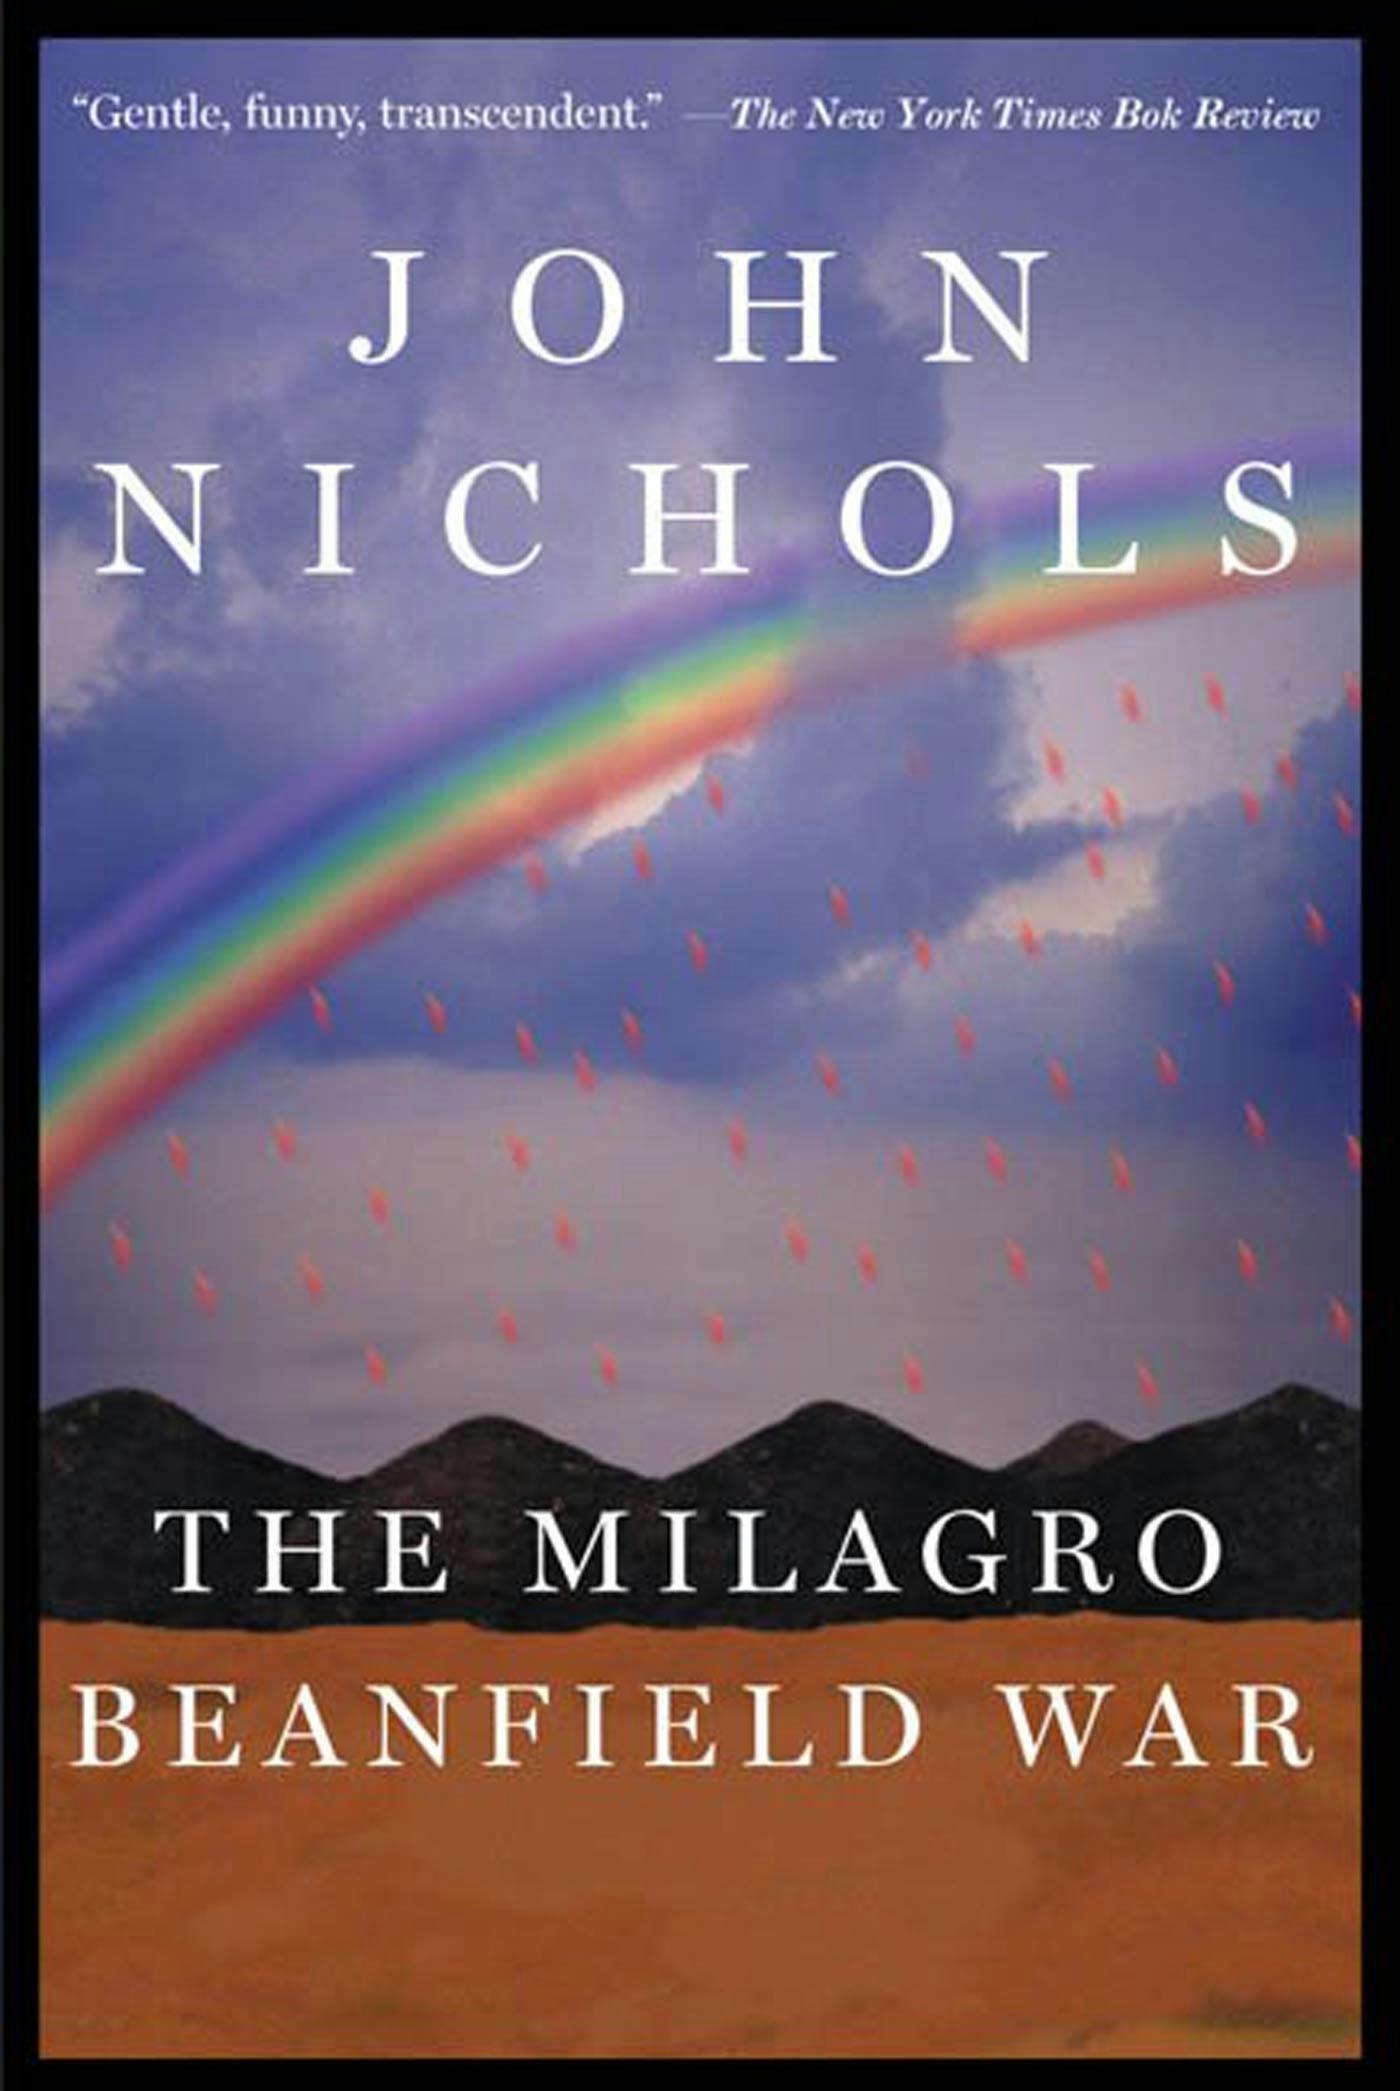 Image of The Milagro Beanfield War